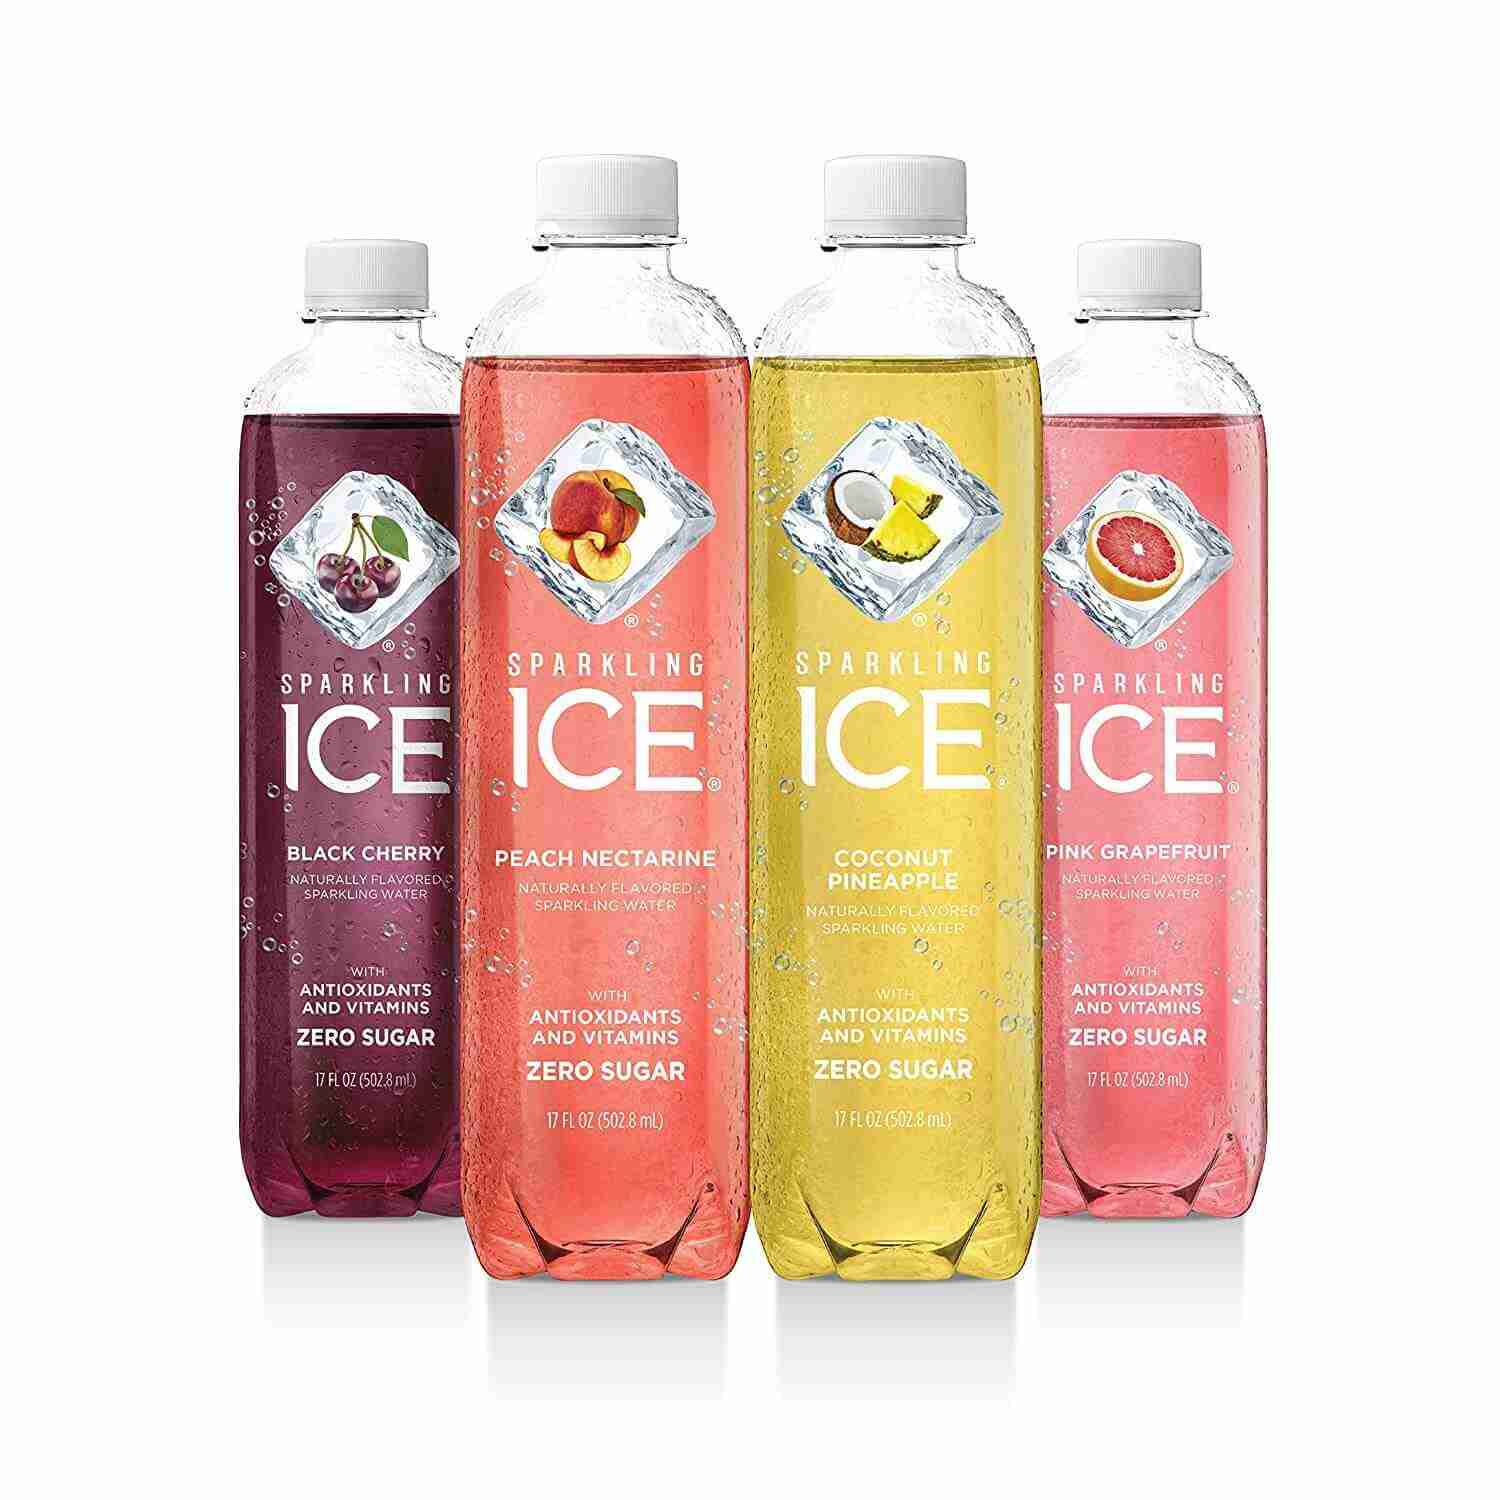 Is Sparkling Ice allowed on Keto? 20+Best Flavors for Keto-dieters - HLNU